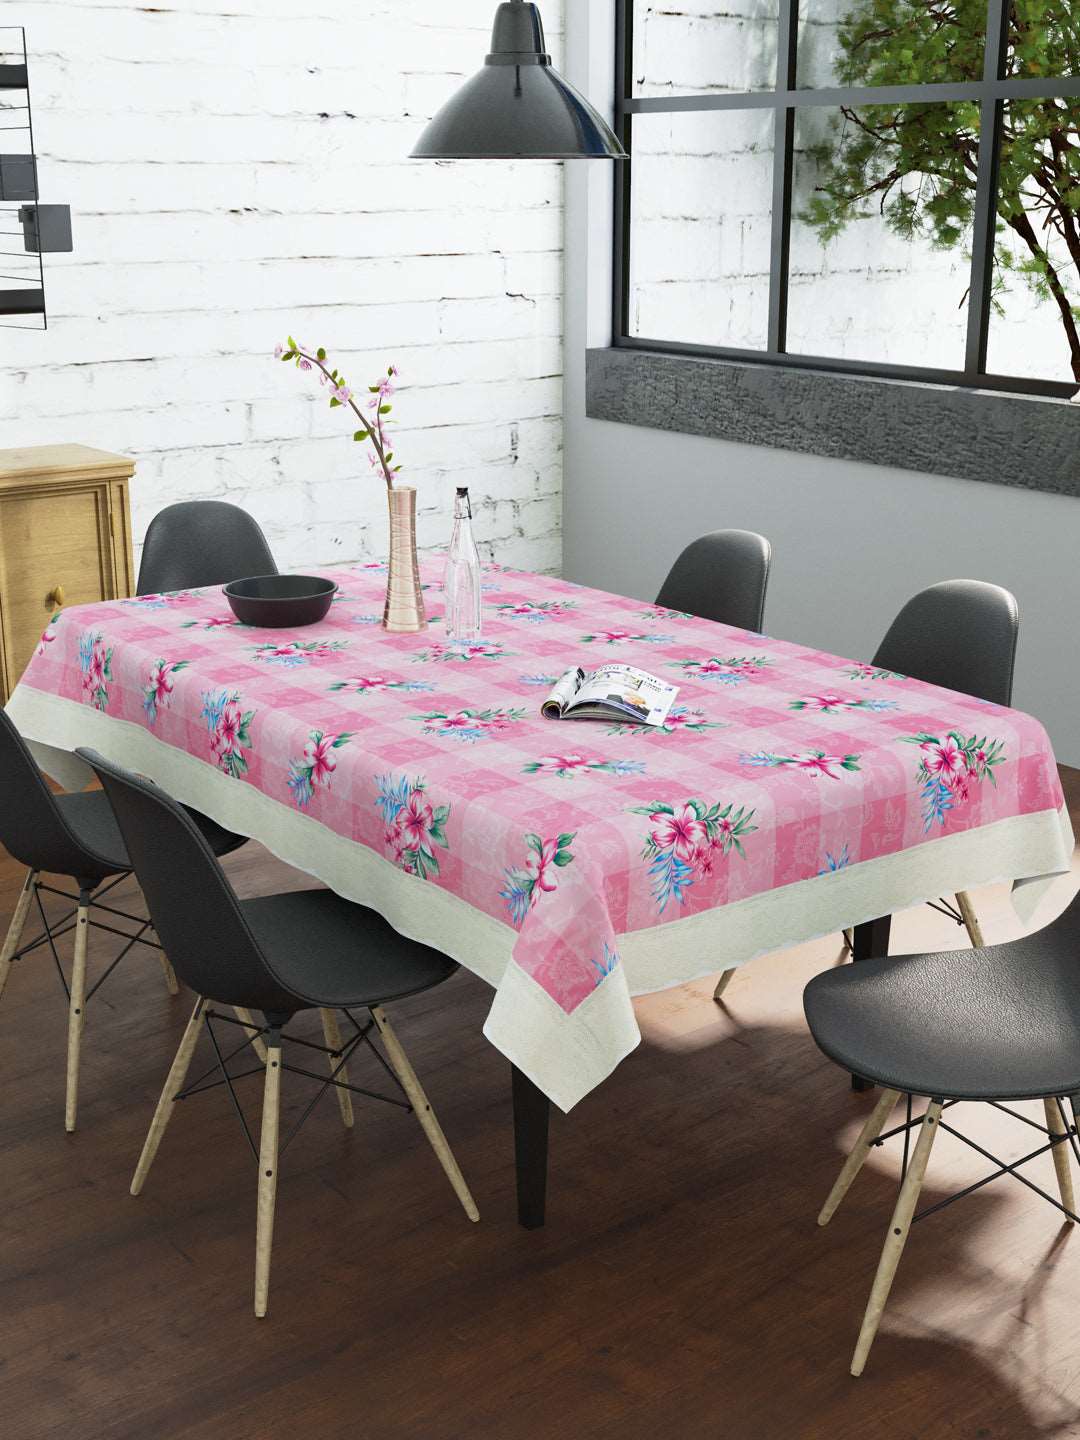 6 Seater Dining Table Cover; Material - PVC; Anti Slip; Pink & Green